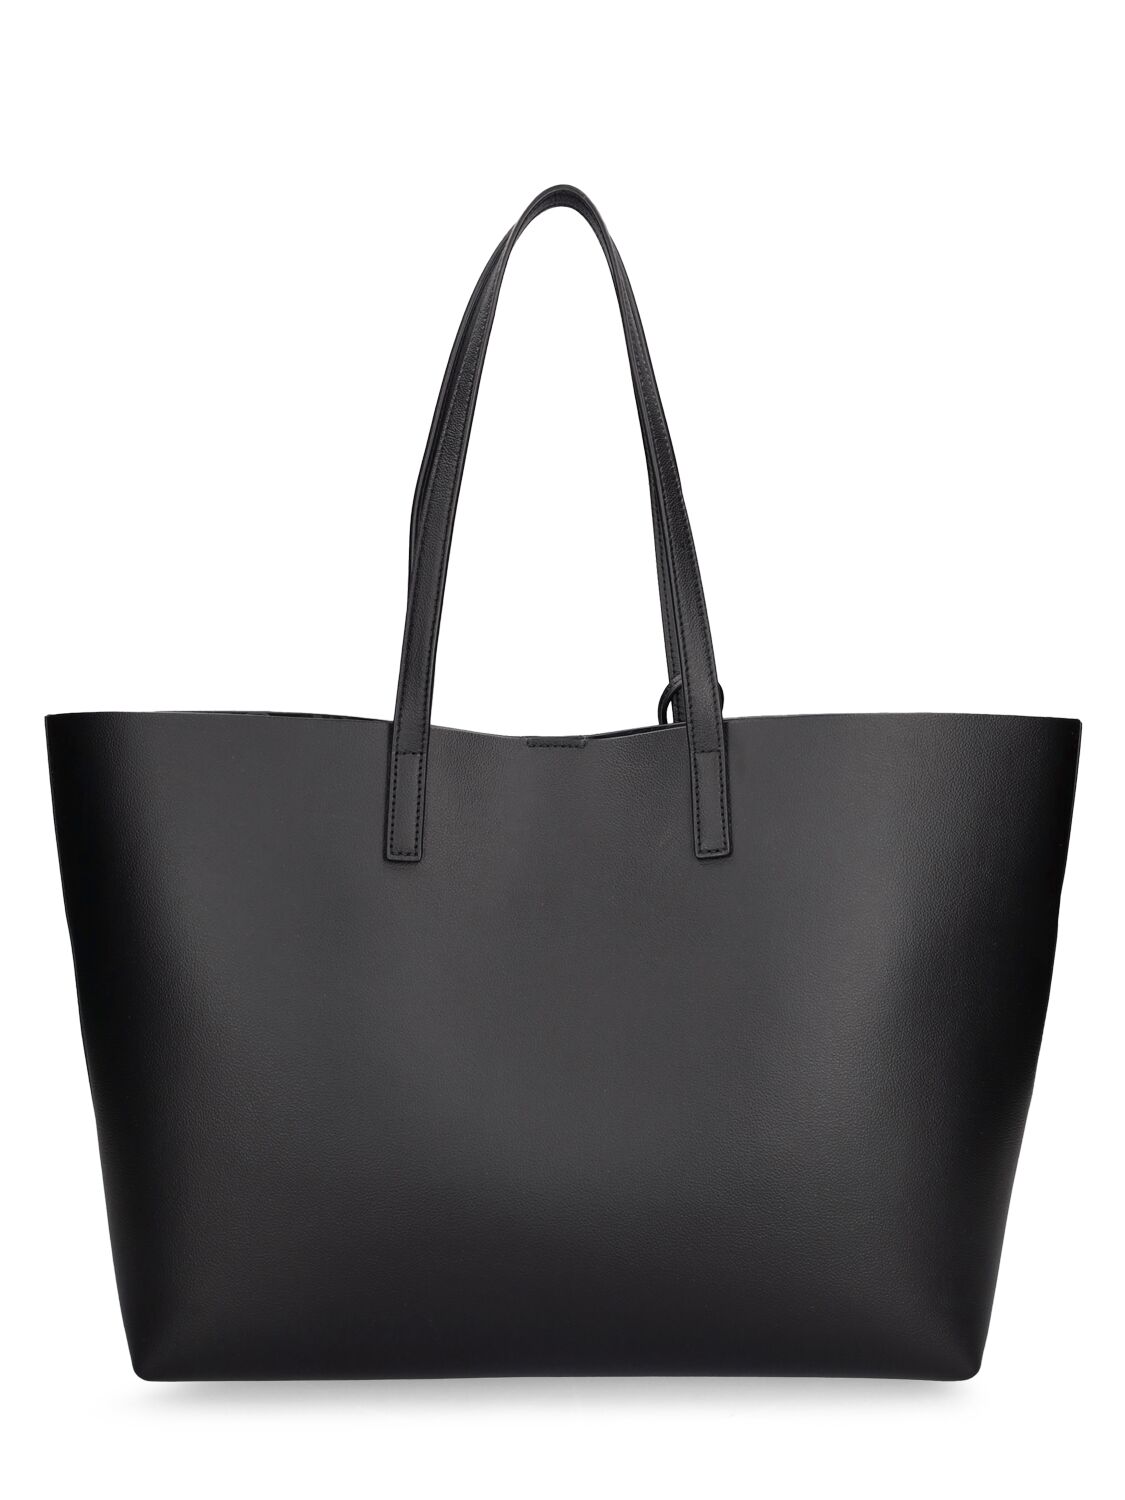 Shop Versace Leather Tote Bag In Black